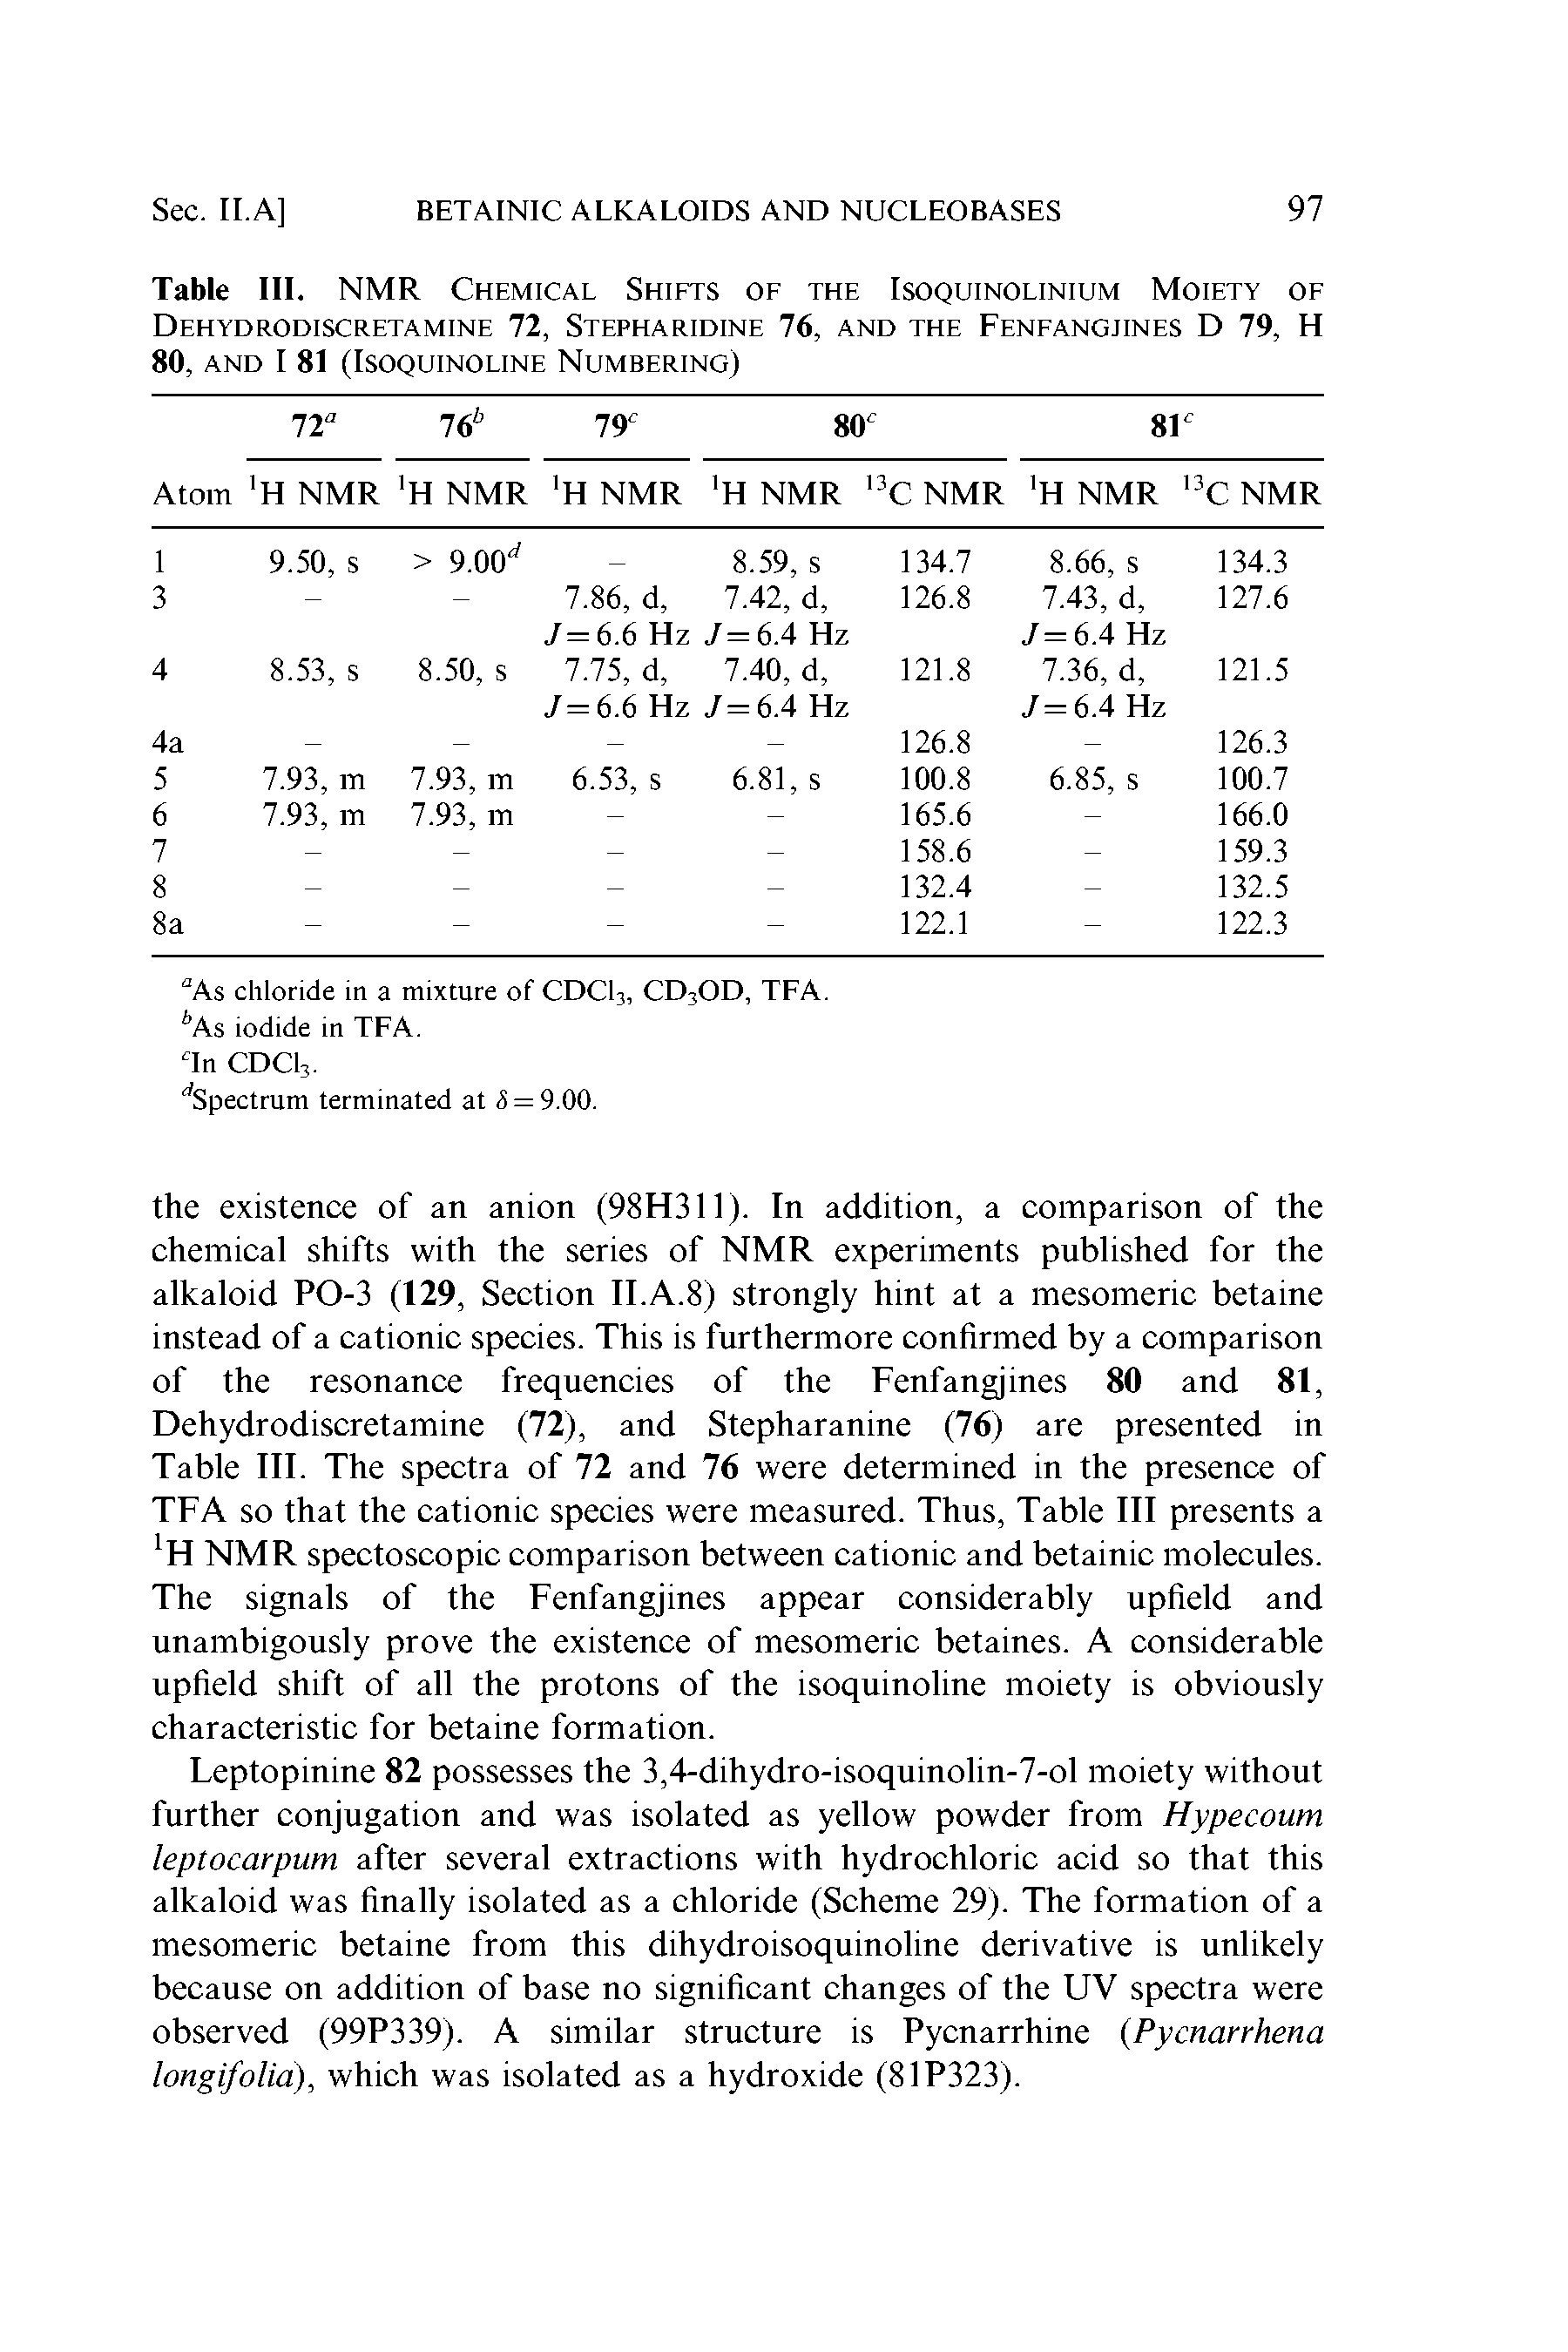 Table III. NMR Chemical Shifts of the Isoquinolinium Moiety of Dehydrodiscretamine 72, Stepharidine 76, and the Fenfangjines D 79, H 80, AND I 81 (Isoquinoline Numbering)...